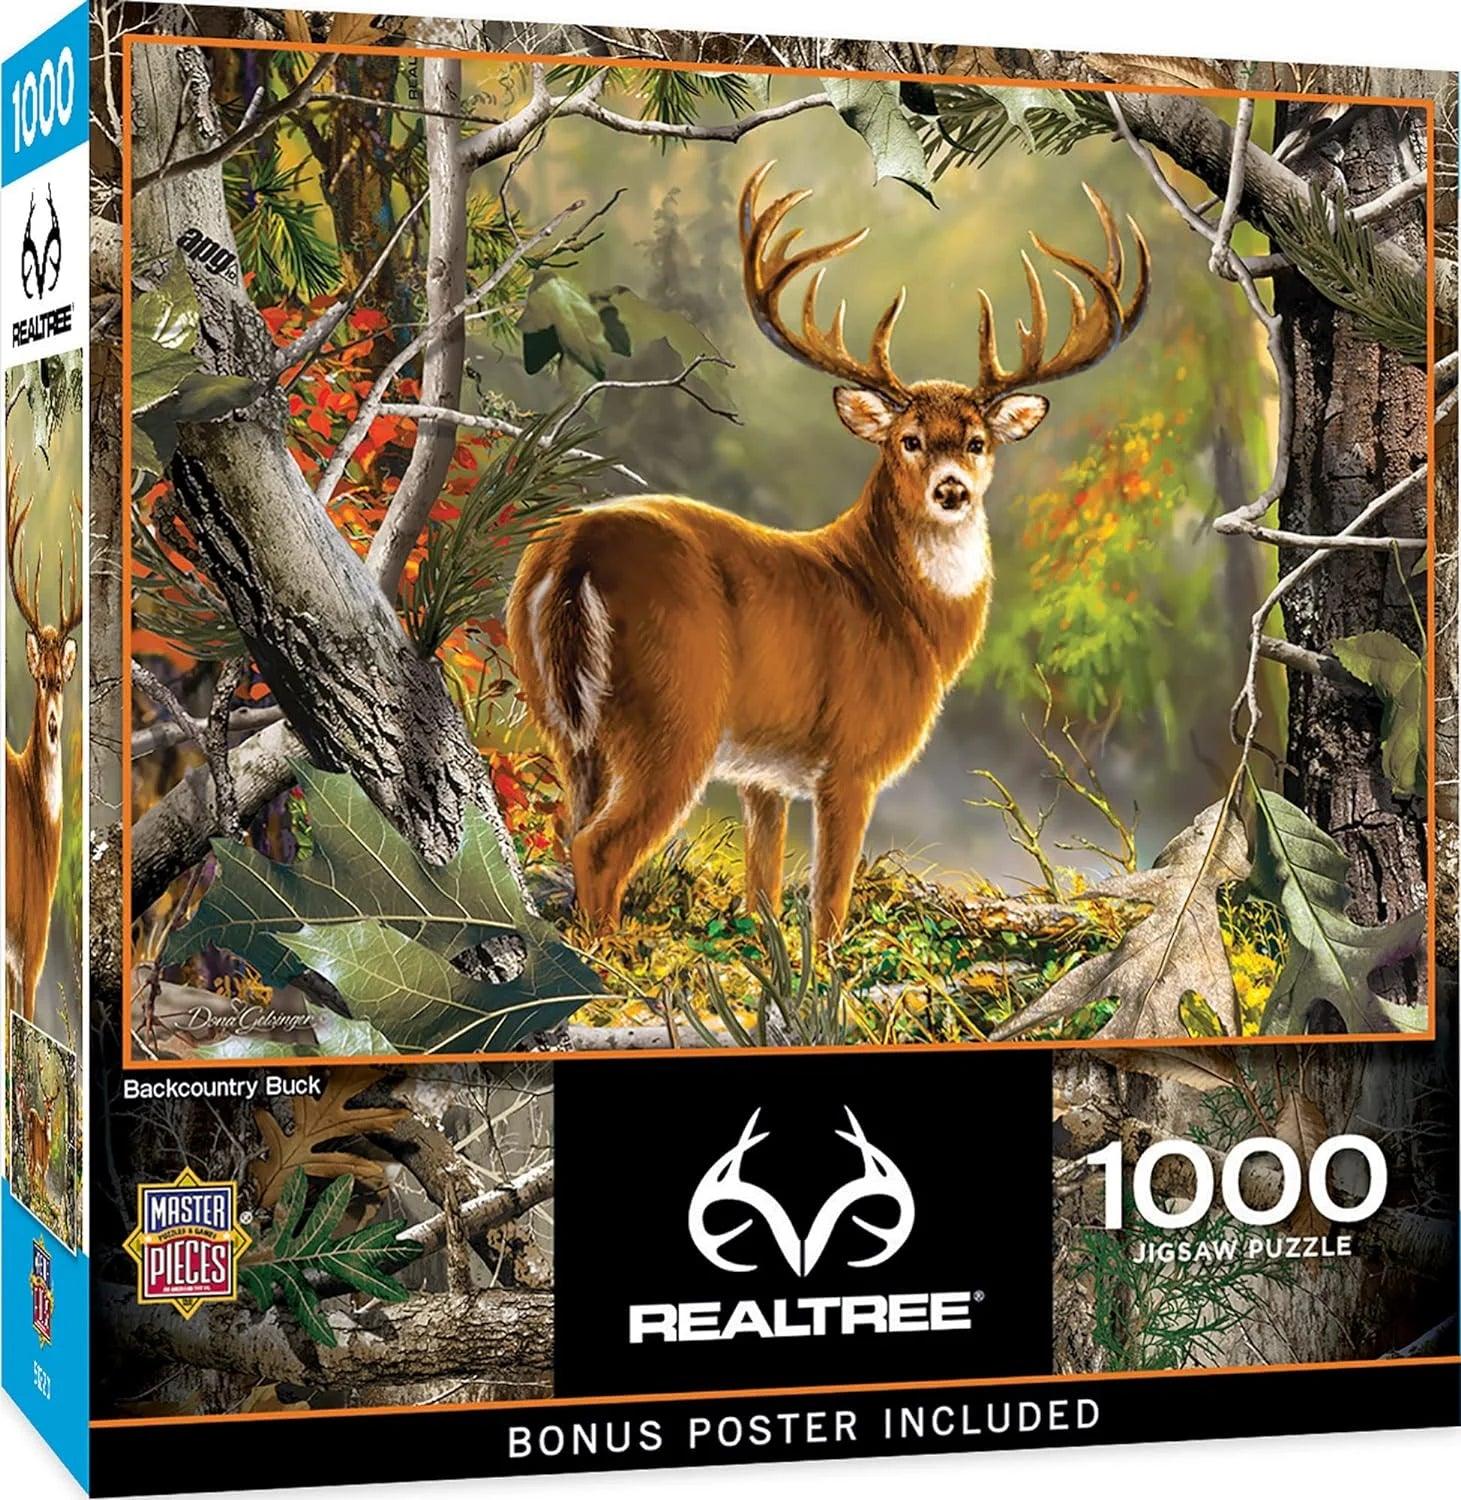 Masterpieces Real Tree Backcounty Buck Deer 1000 Pieces Jigsaw Puzzle - Eclipse Games Puzzles Novelties